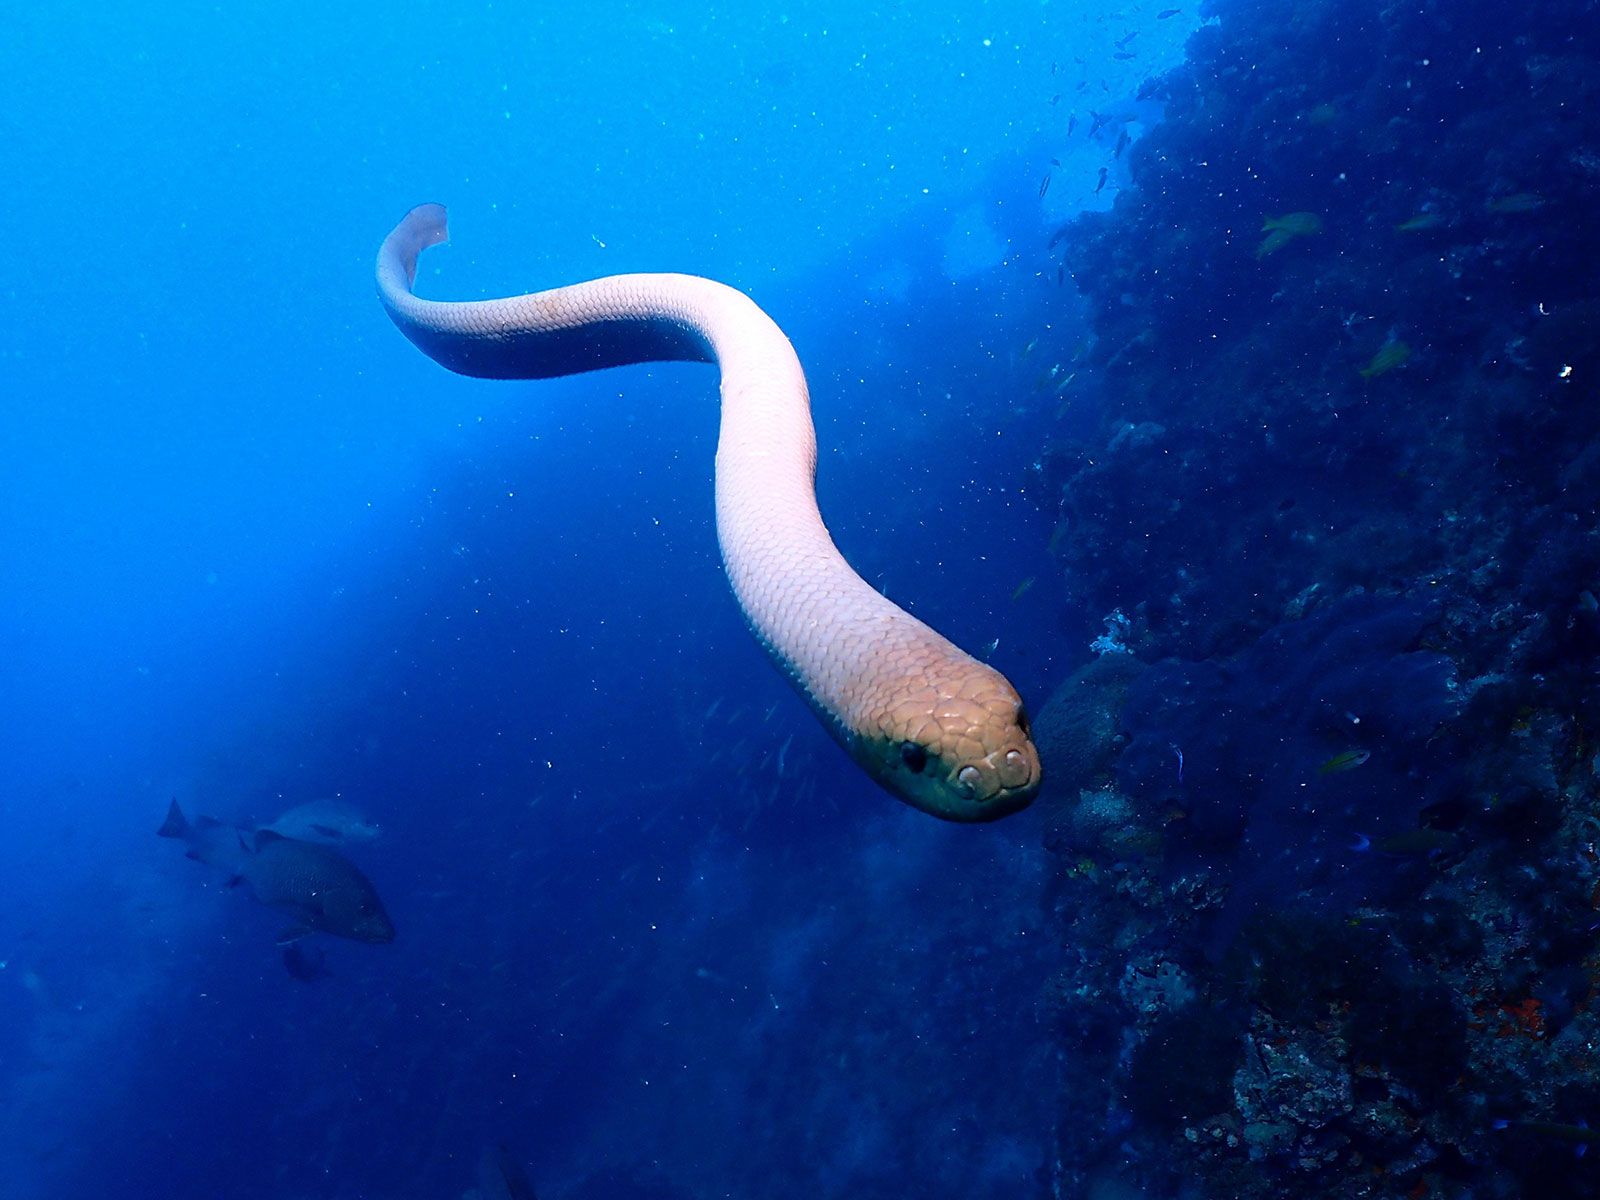 GIANT SNAKE FOUND IN THE RED SEA 